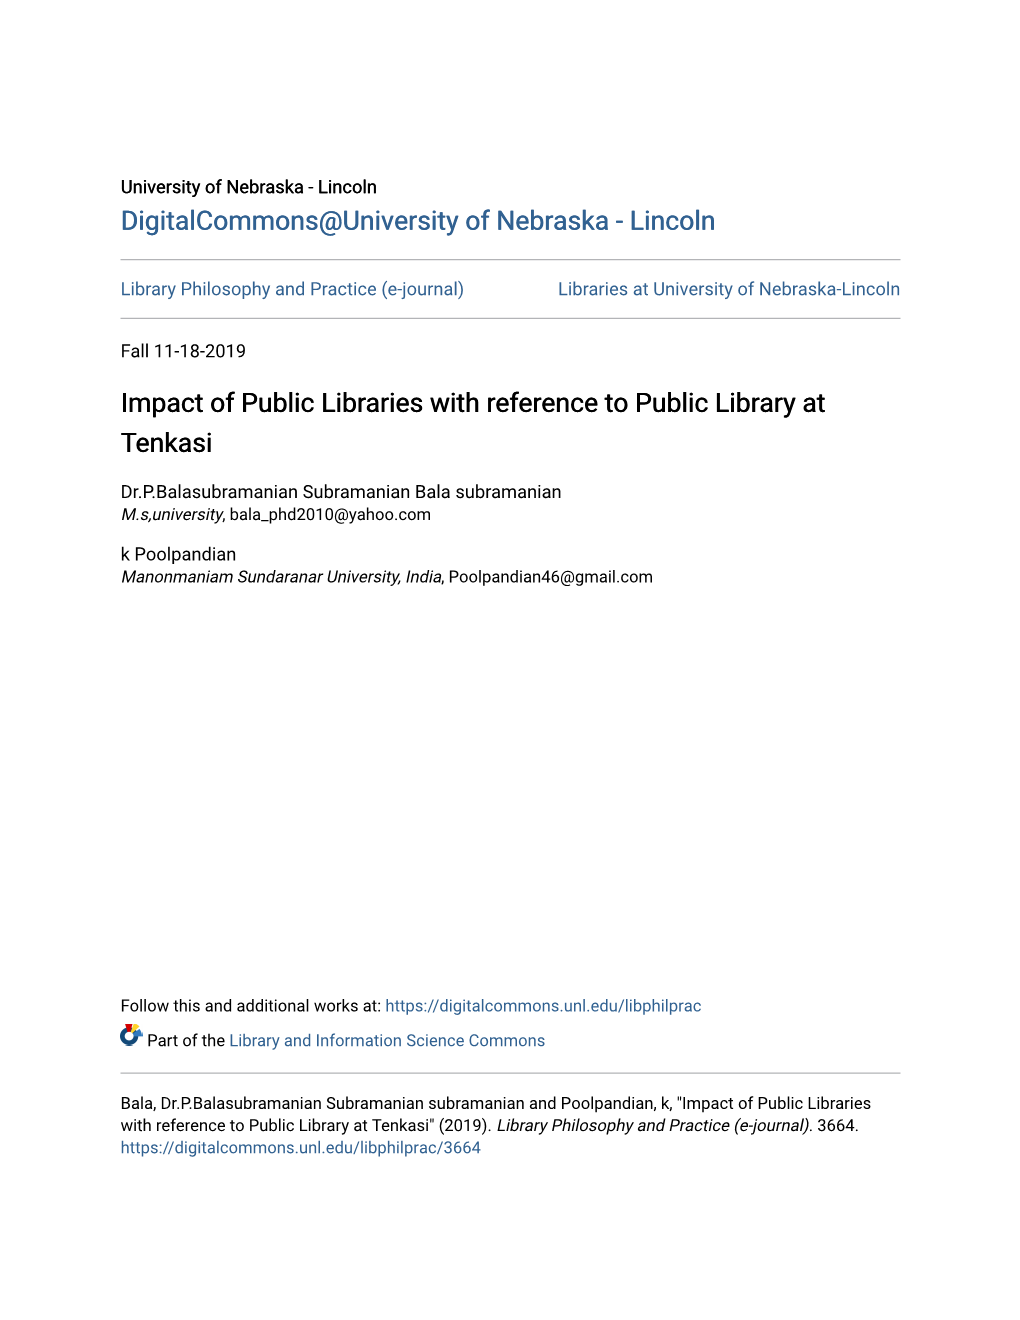 Impact of Public Libraries with Reference to Public Library at Tenkasi